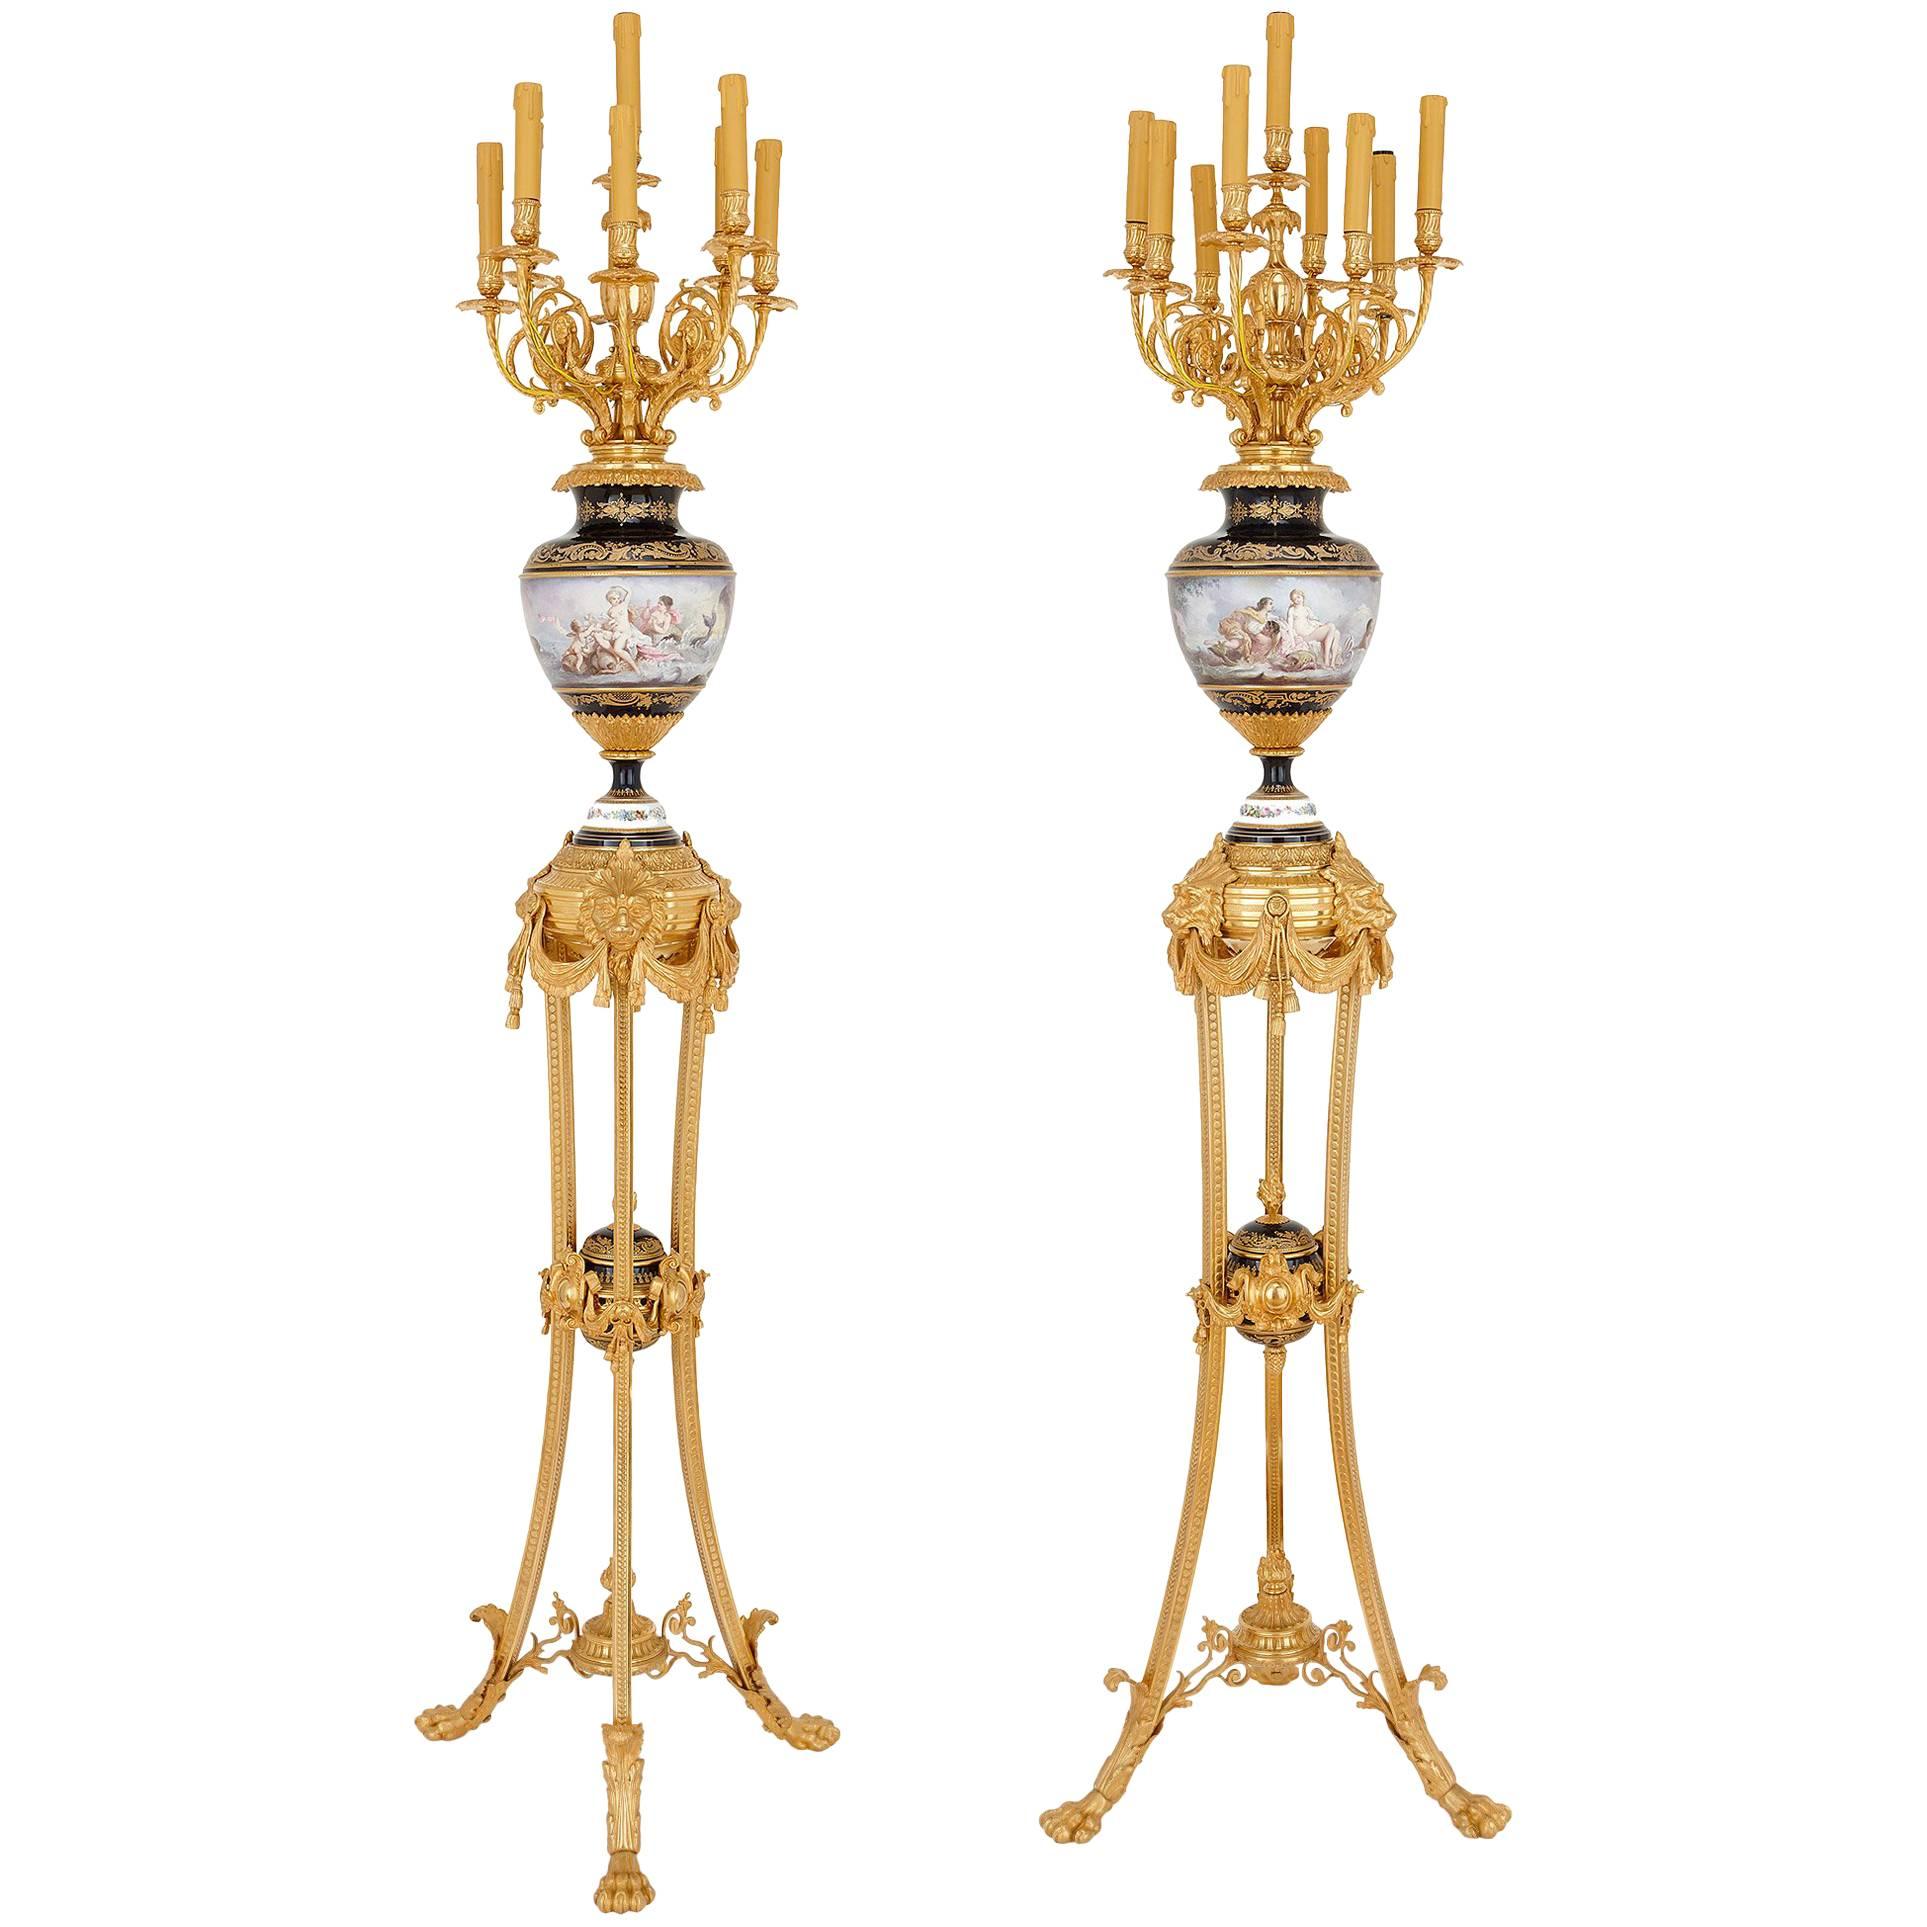 Pair of Sevres Style Porcelain and Gilt Bronze Floor Standing Torcheres